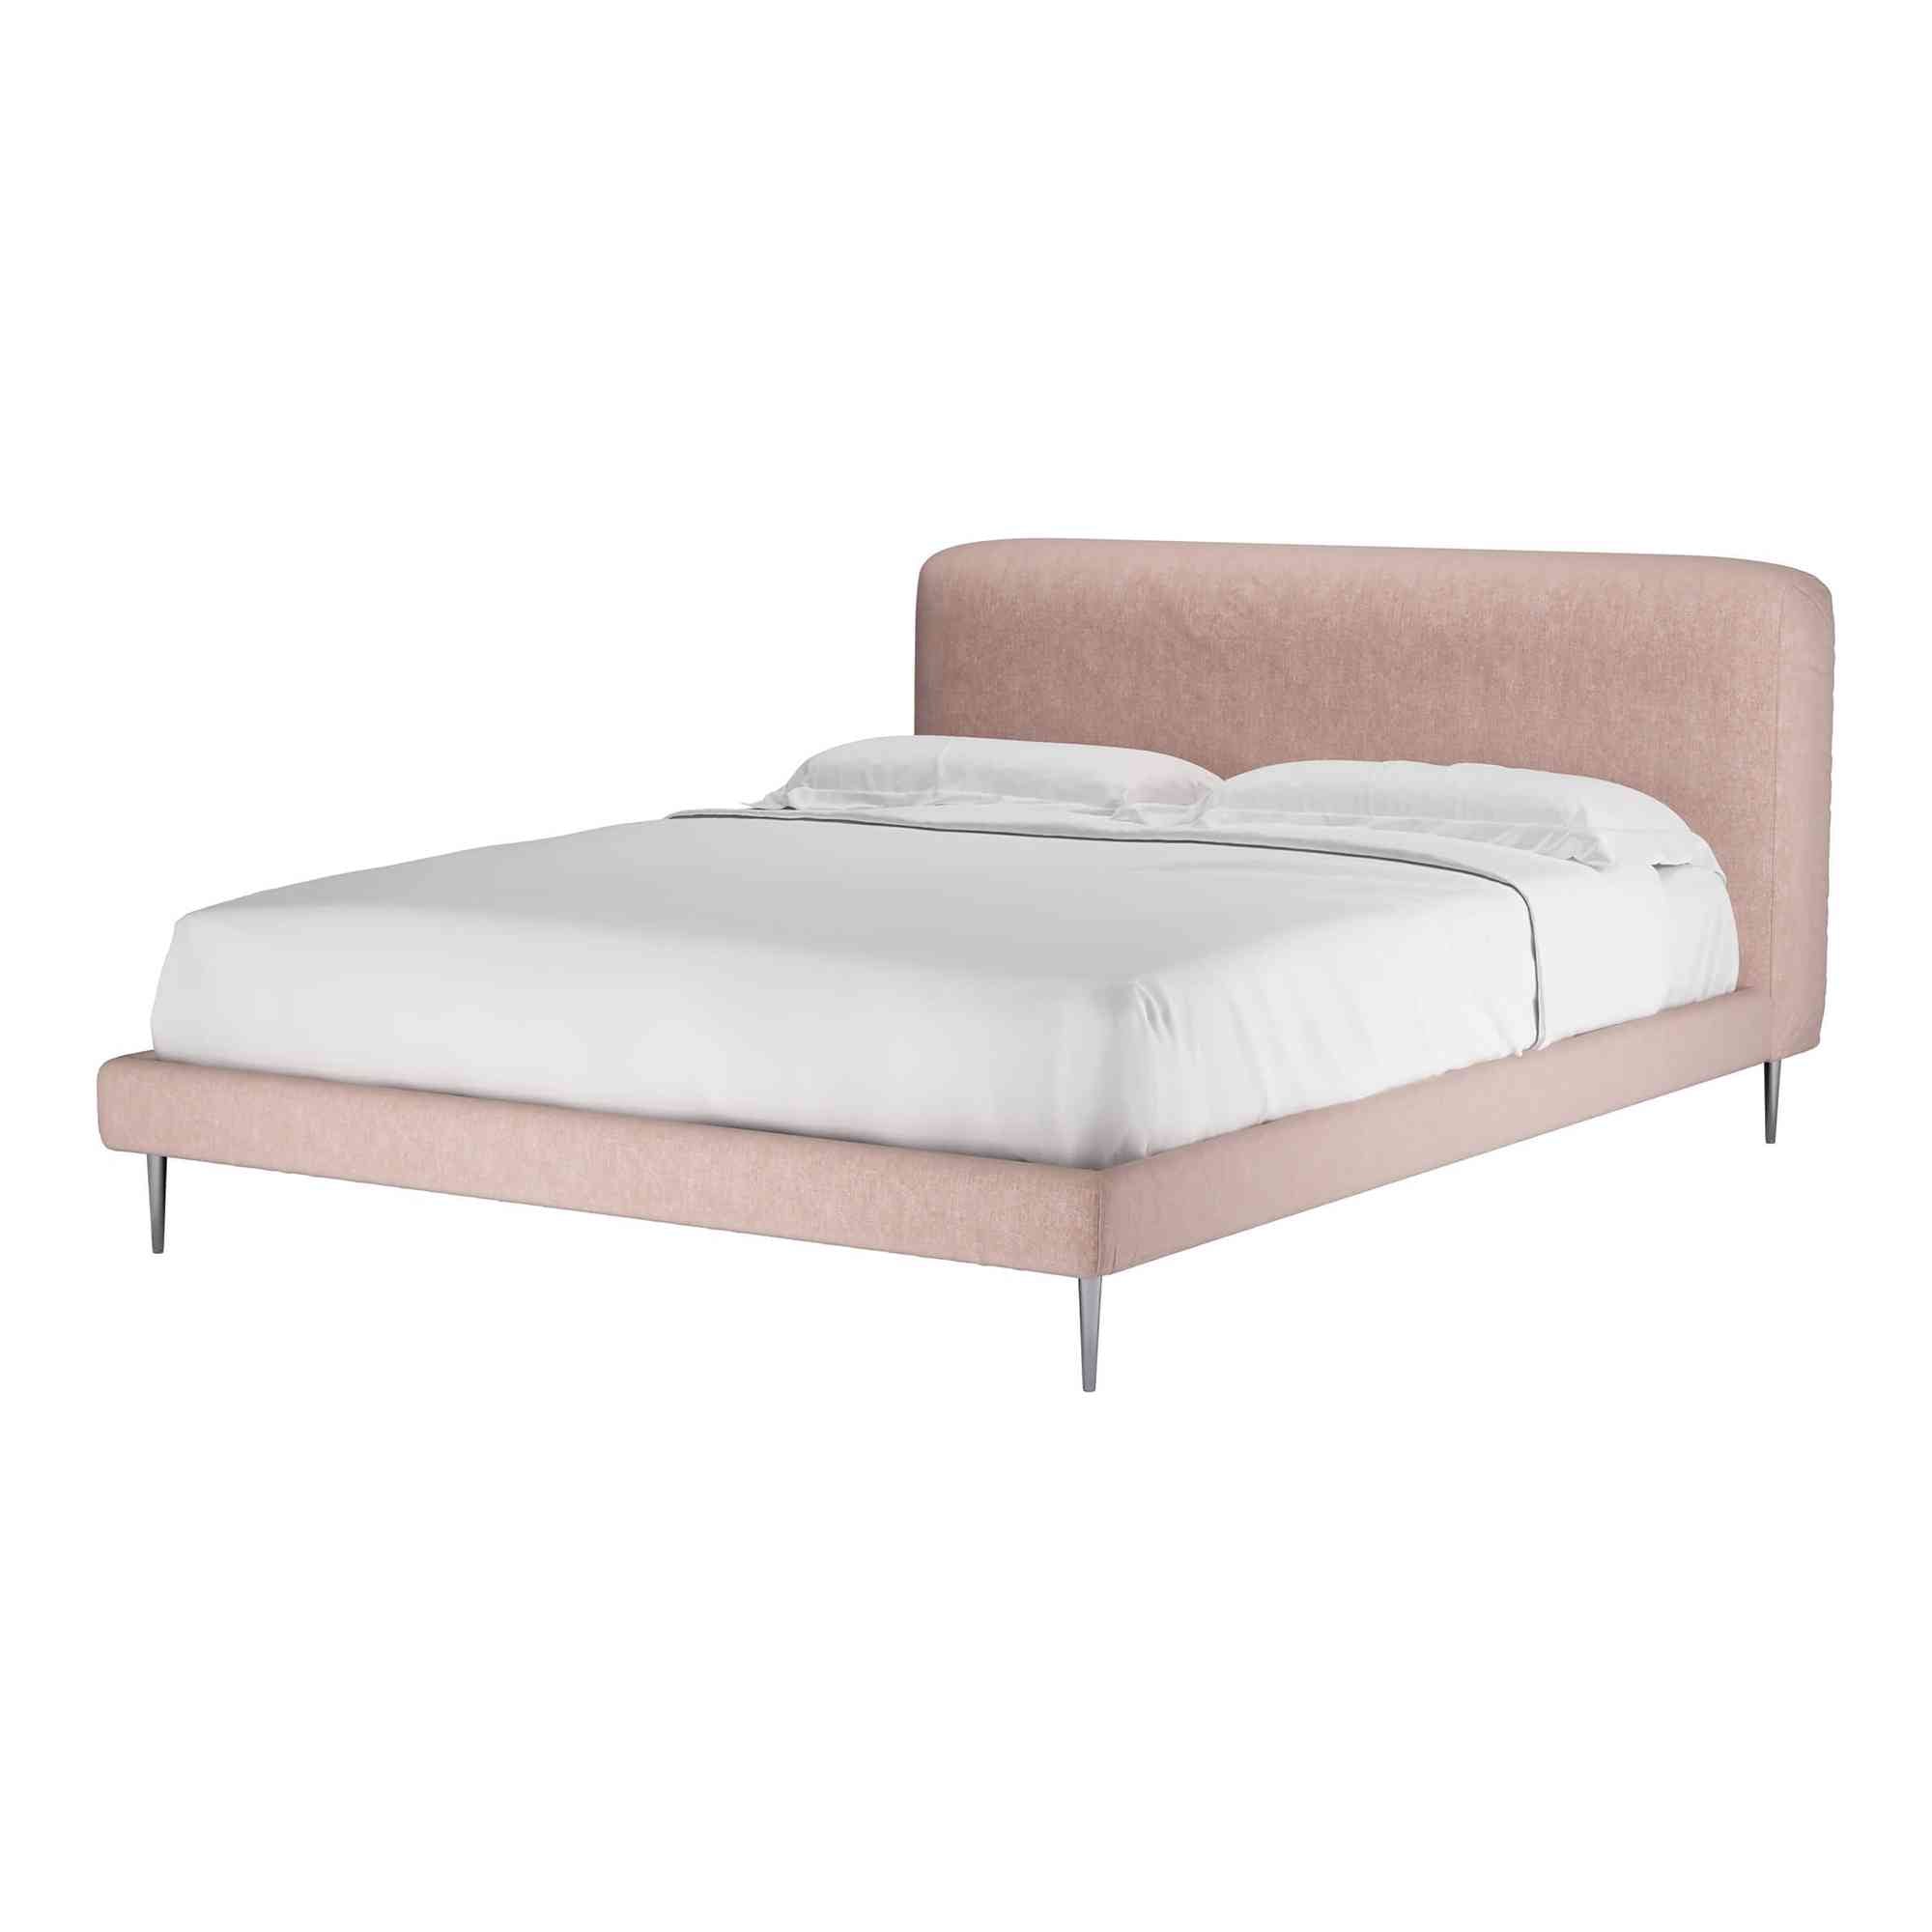 Lucy Pavilion Pink Brushstroke Bed - King Size